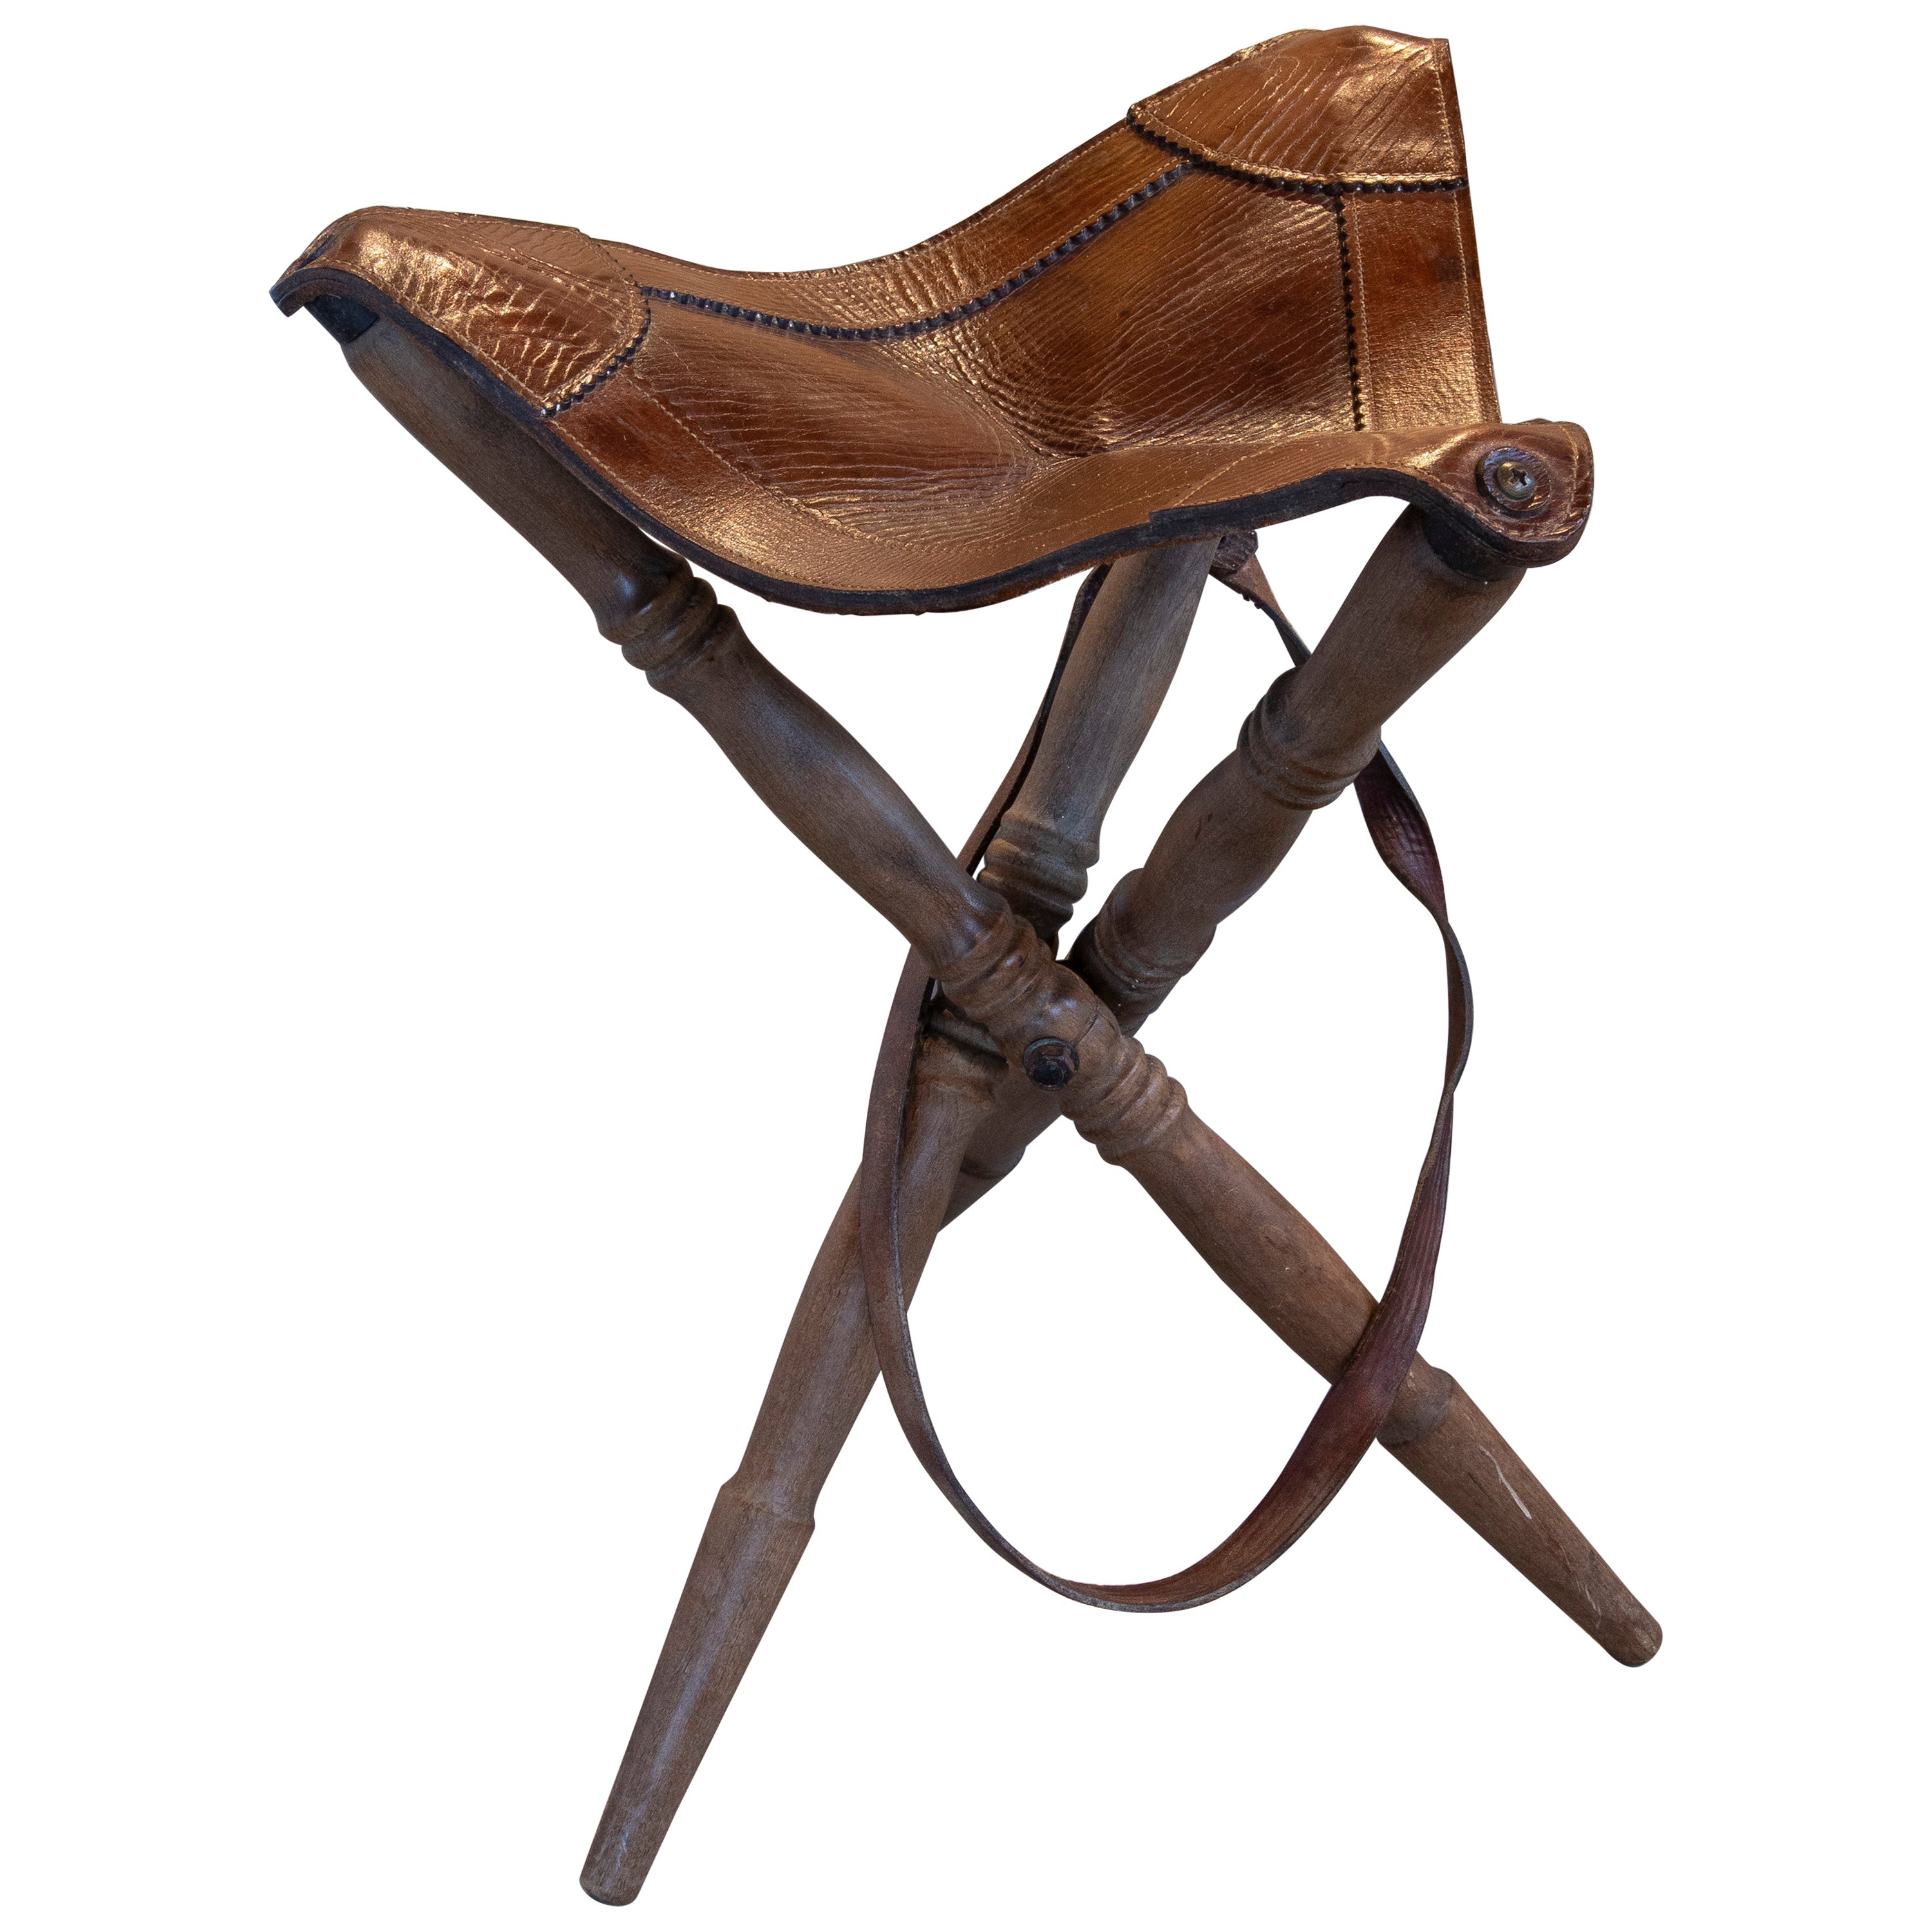 Spanish Folding Stool with Wooden Legs and Leather Seat For Sale